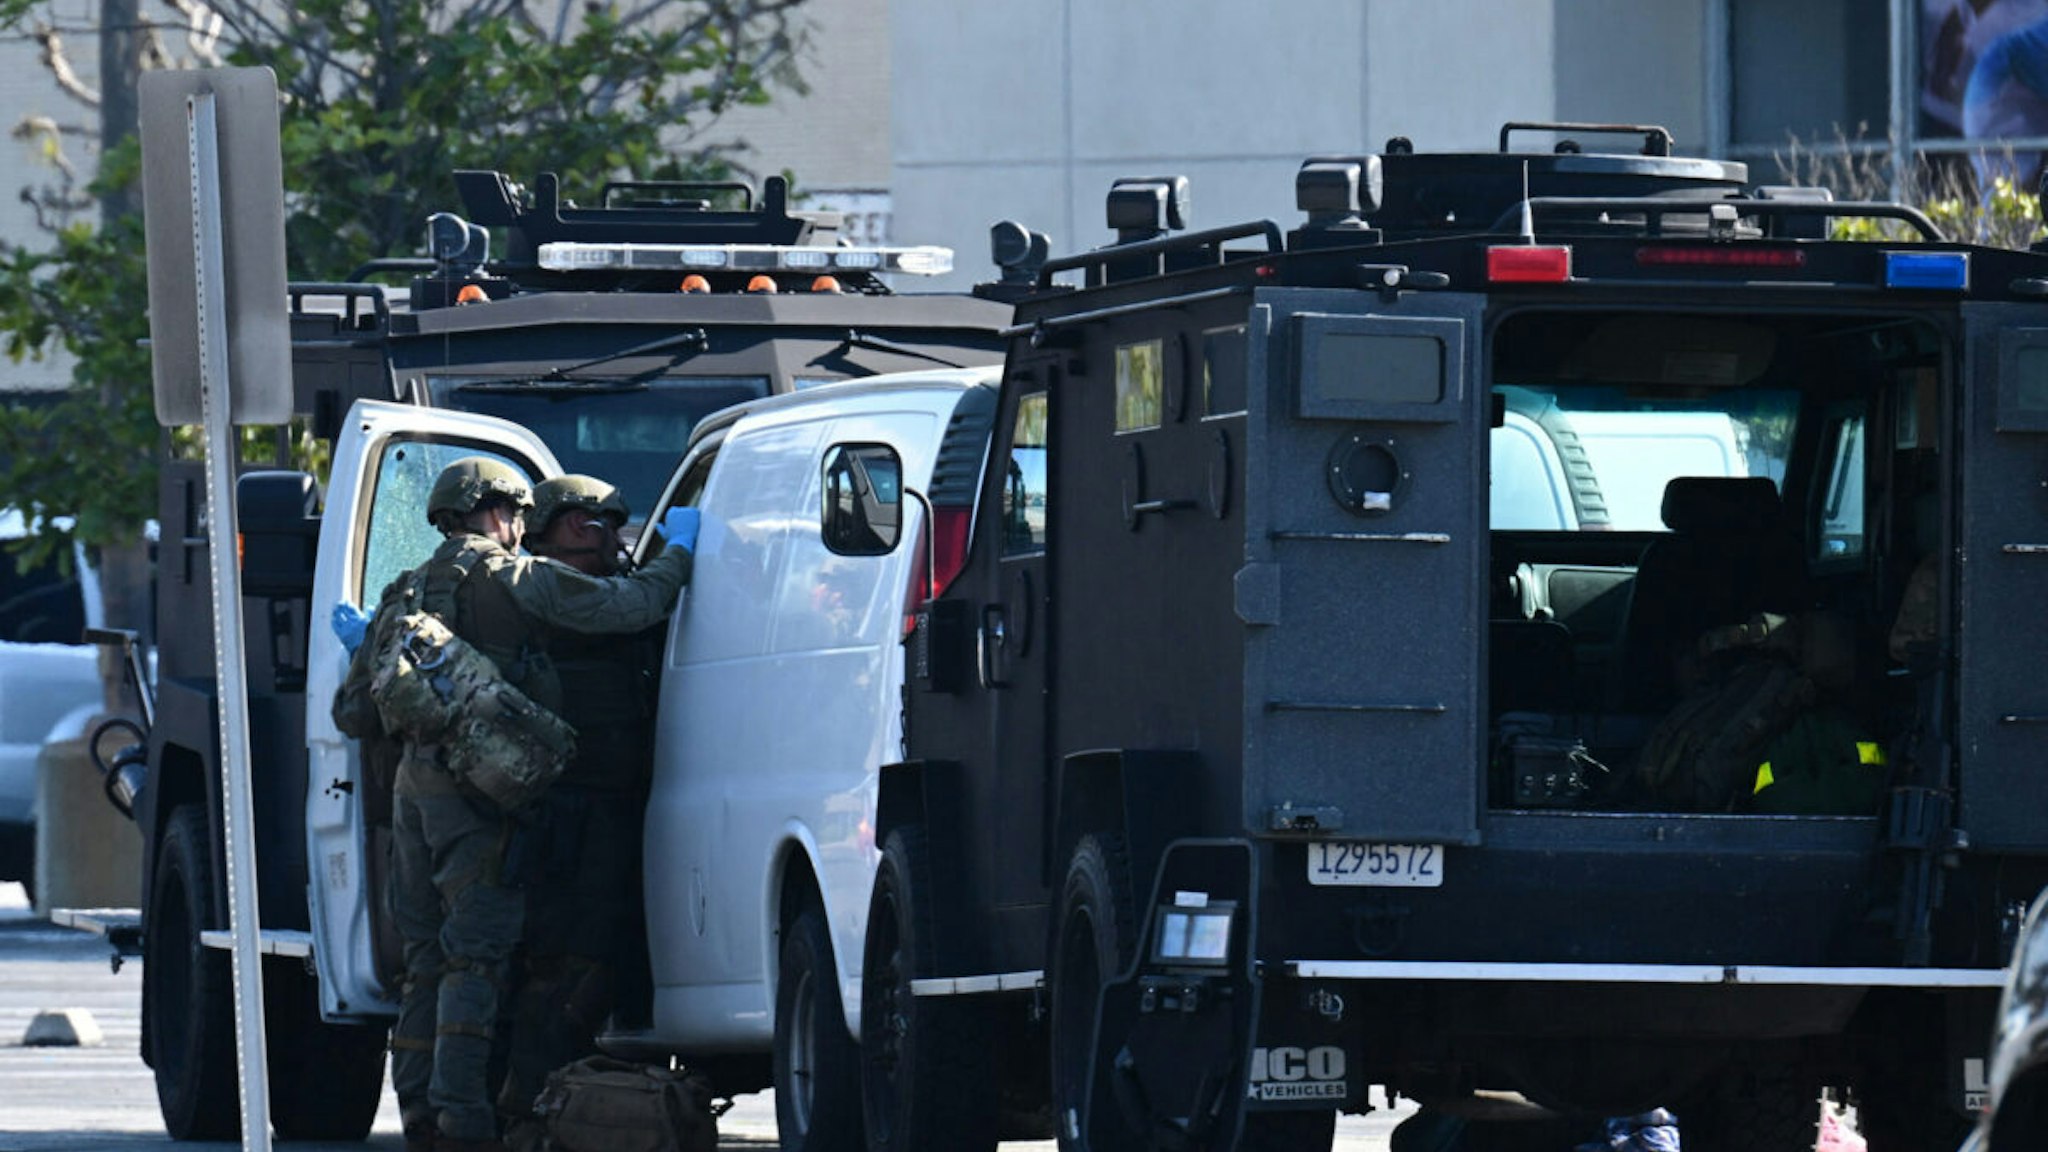 Law enforcement personnel open the door of a van outside the site in Torrance, California, where the alleged suspect in the mass shooting in which 10 people were killed in Monterey Park, California, is believed to be holed up on January 22, 2023.